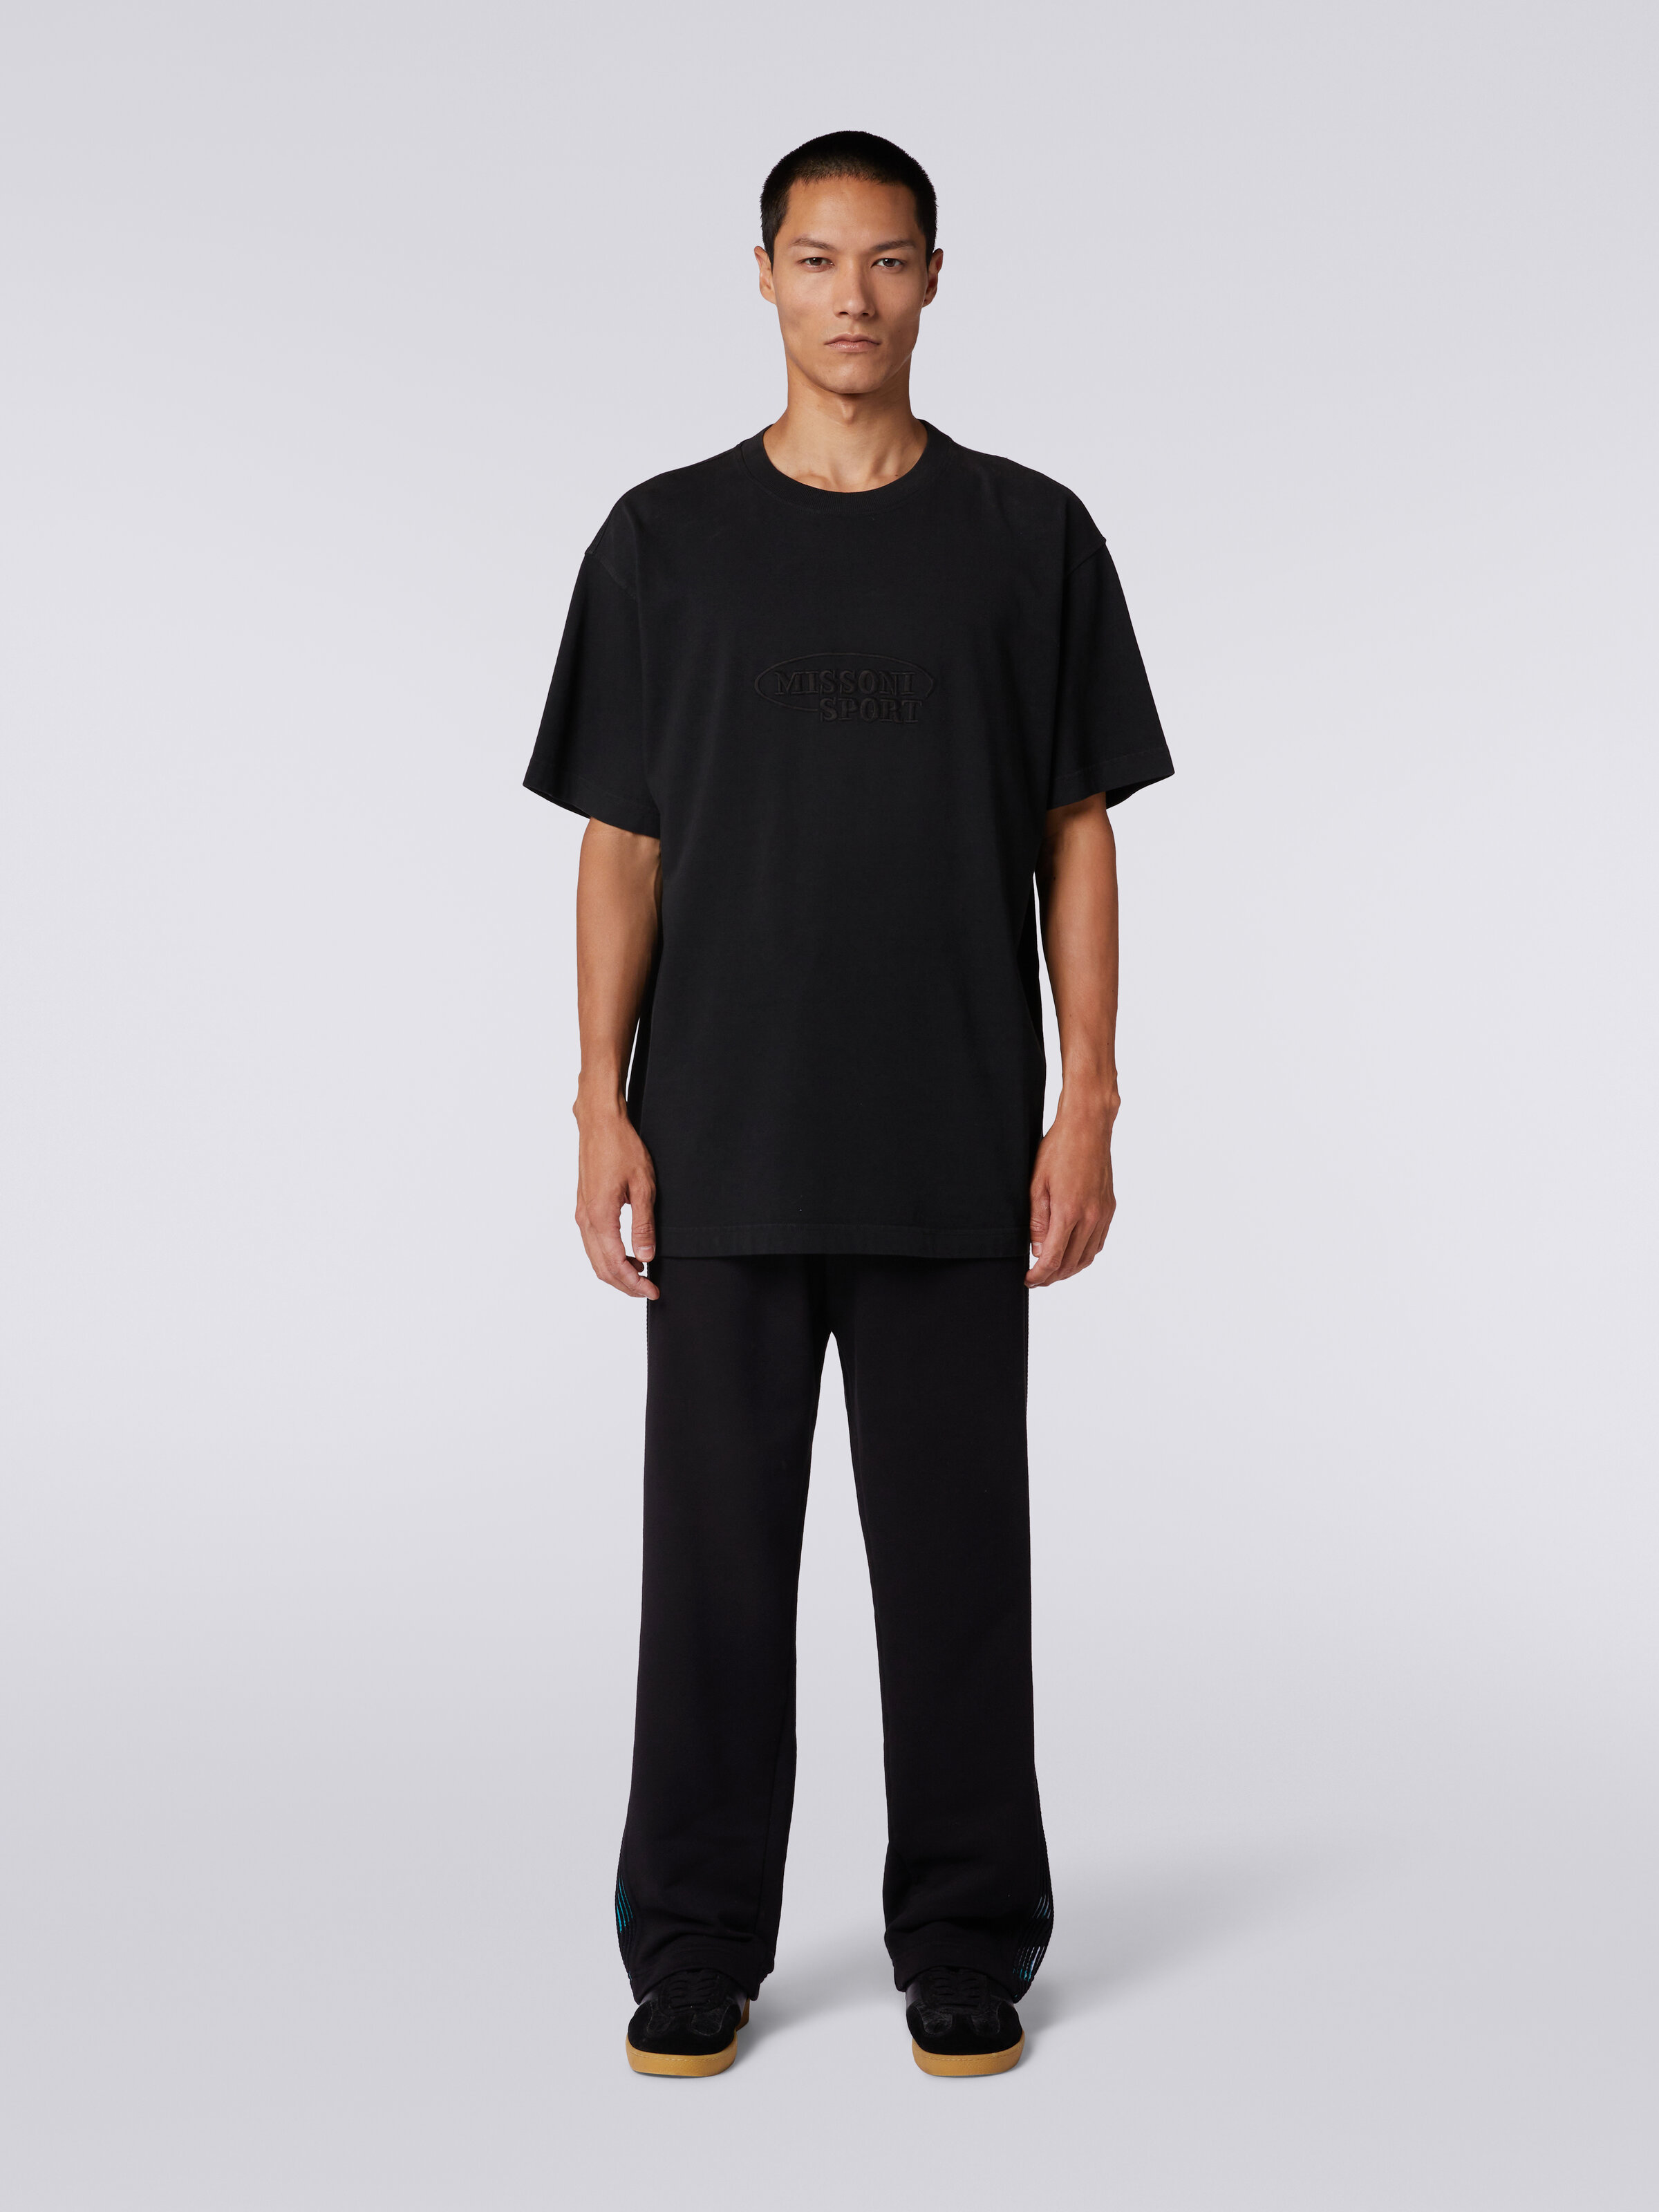 Crew-neck T-shirt in cotton with logo, Black    - 1